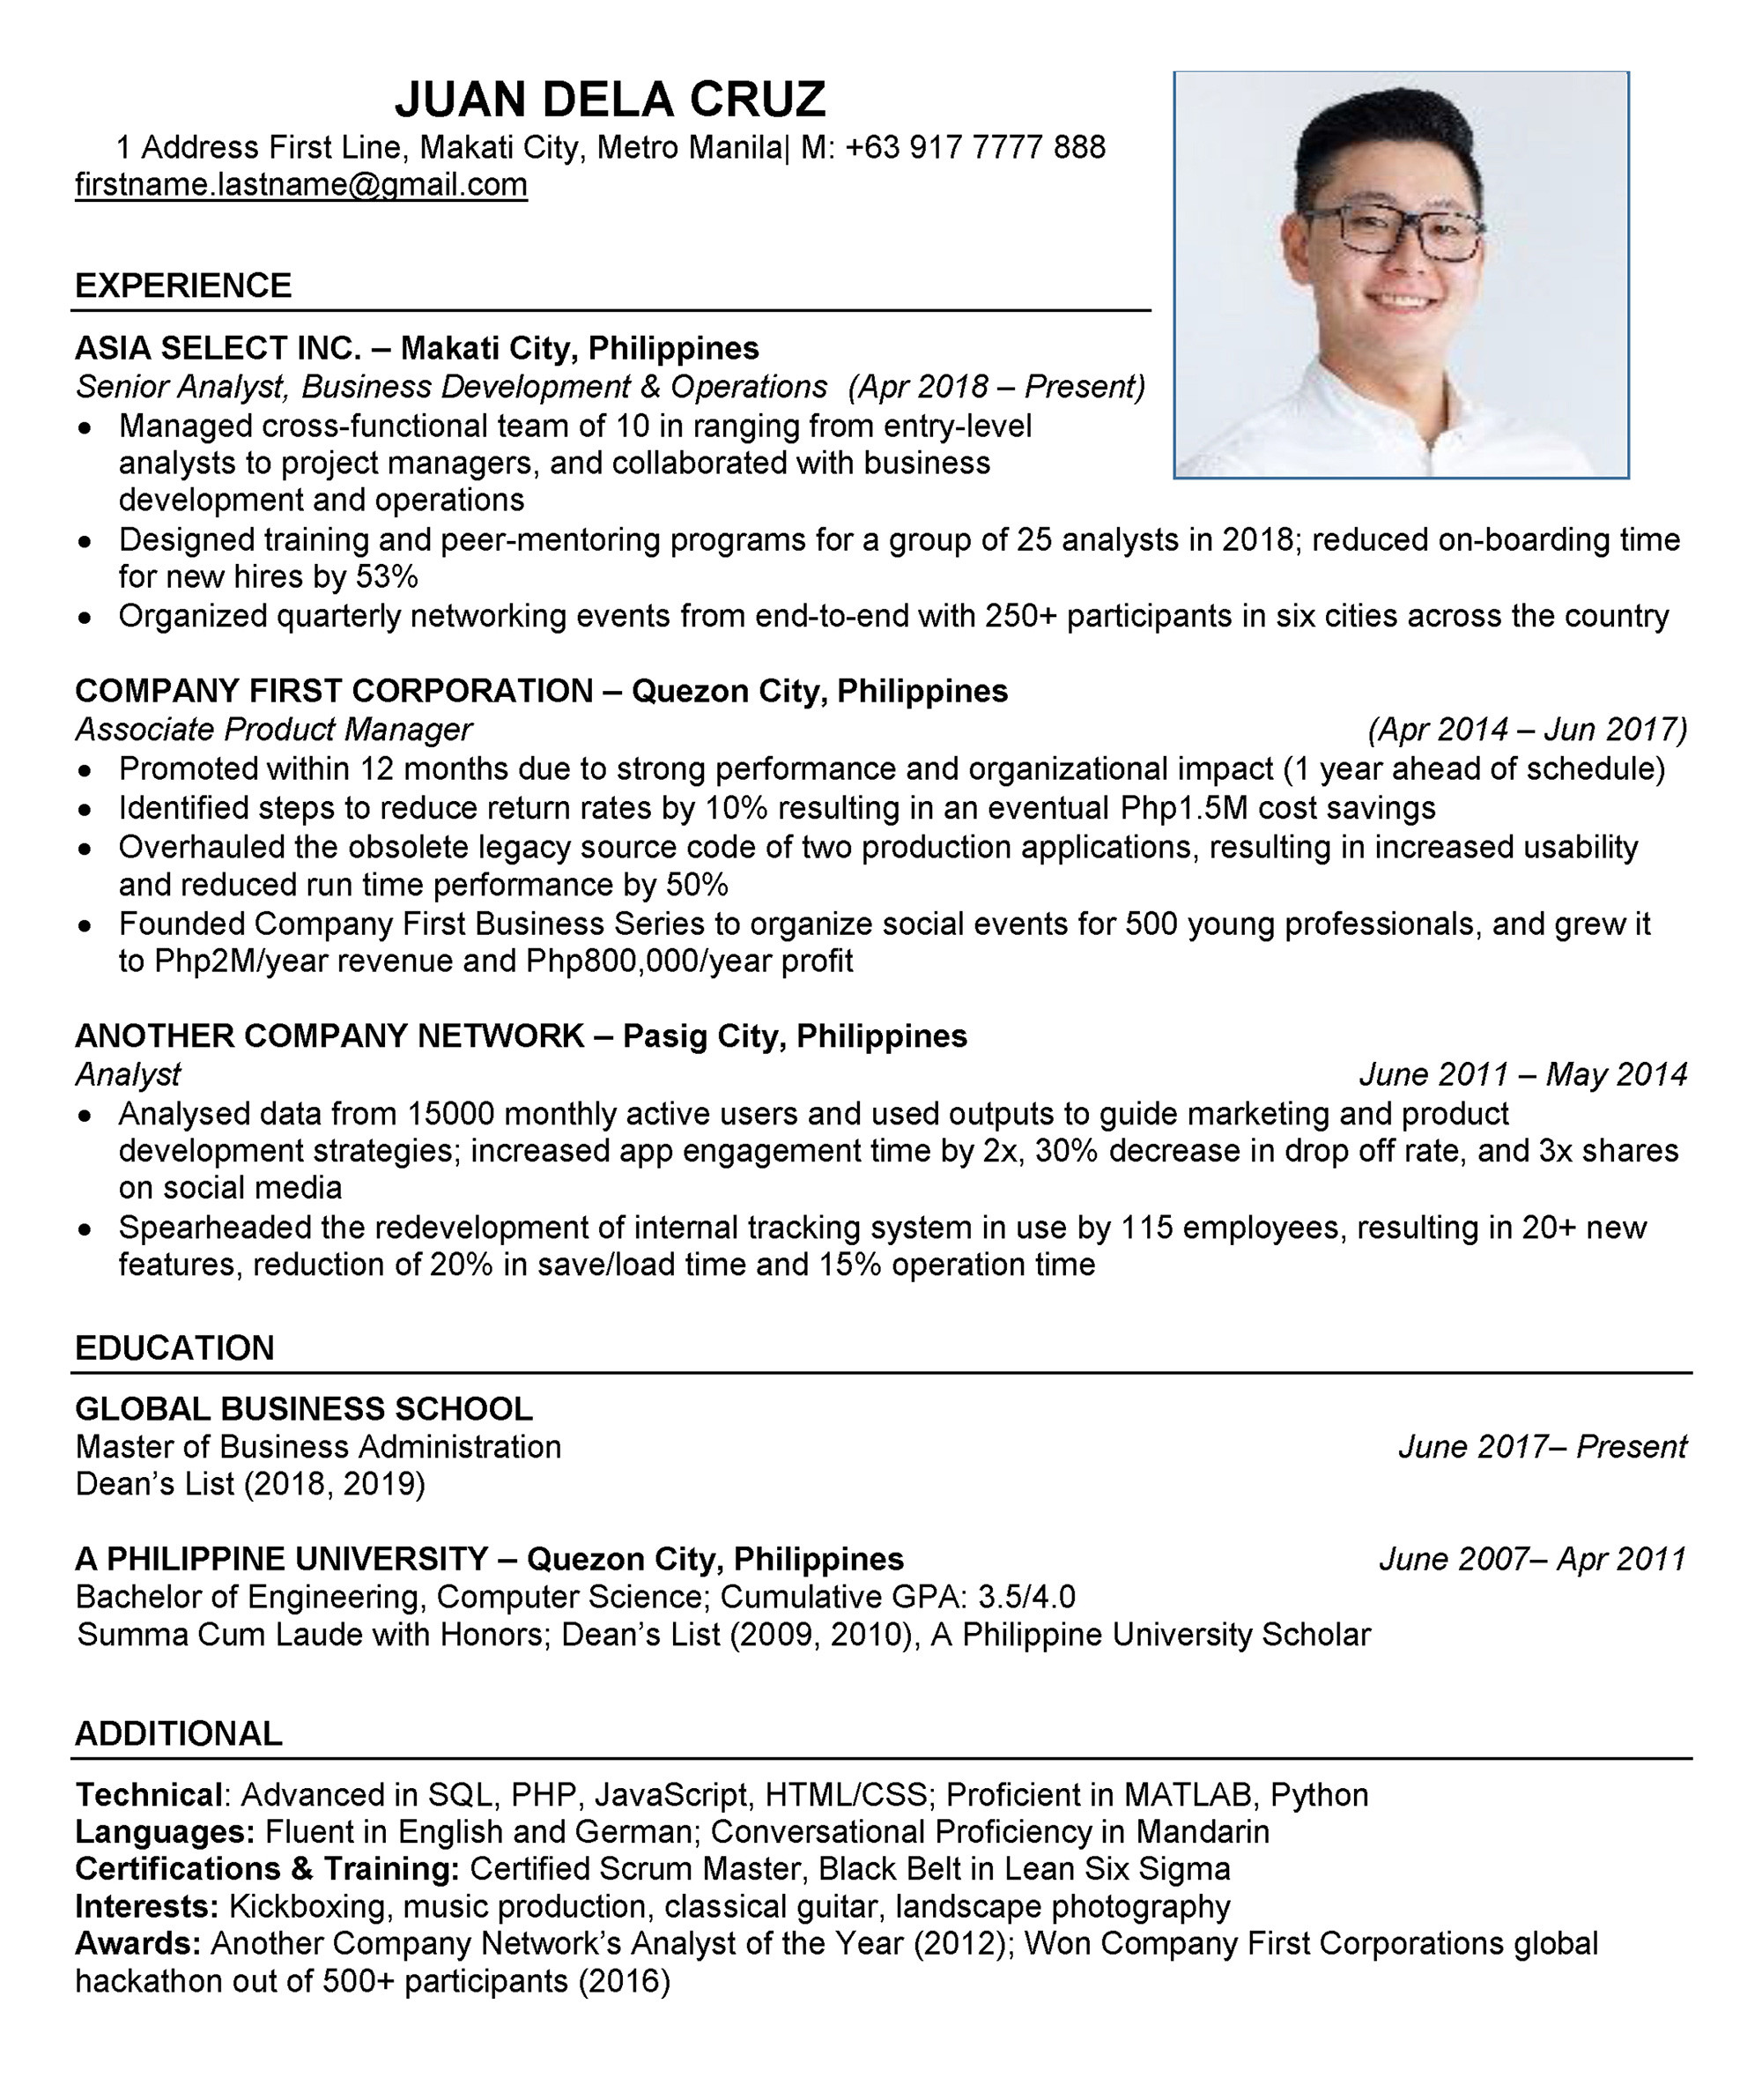 Latest Resume format Sample In the Philippines How to Make A Pro Resume Based On ats format asia Select